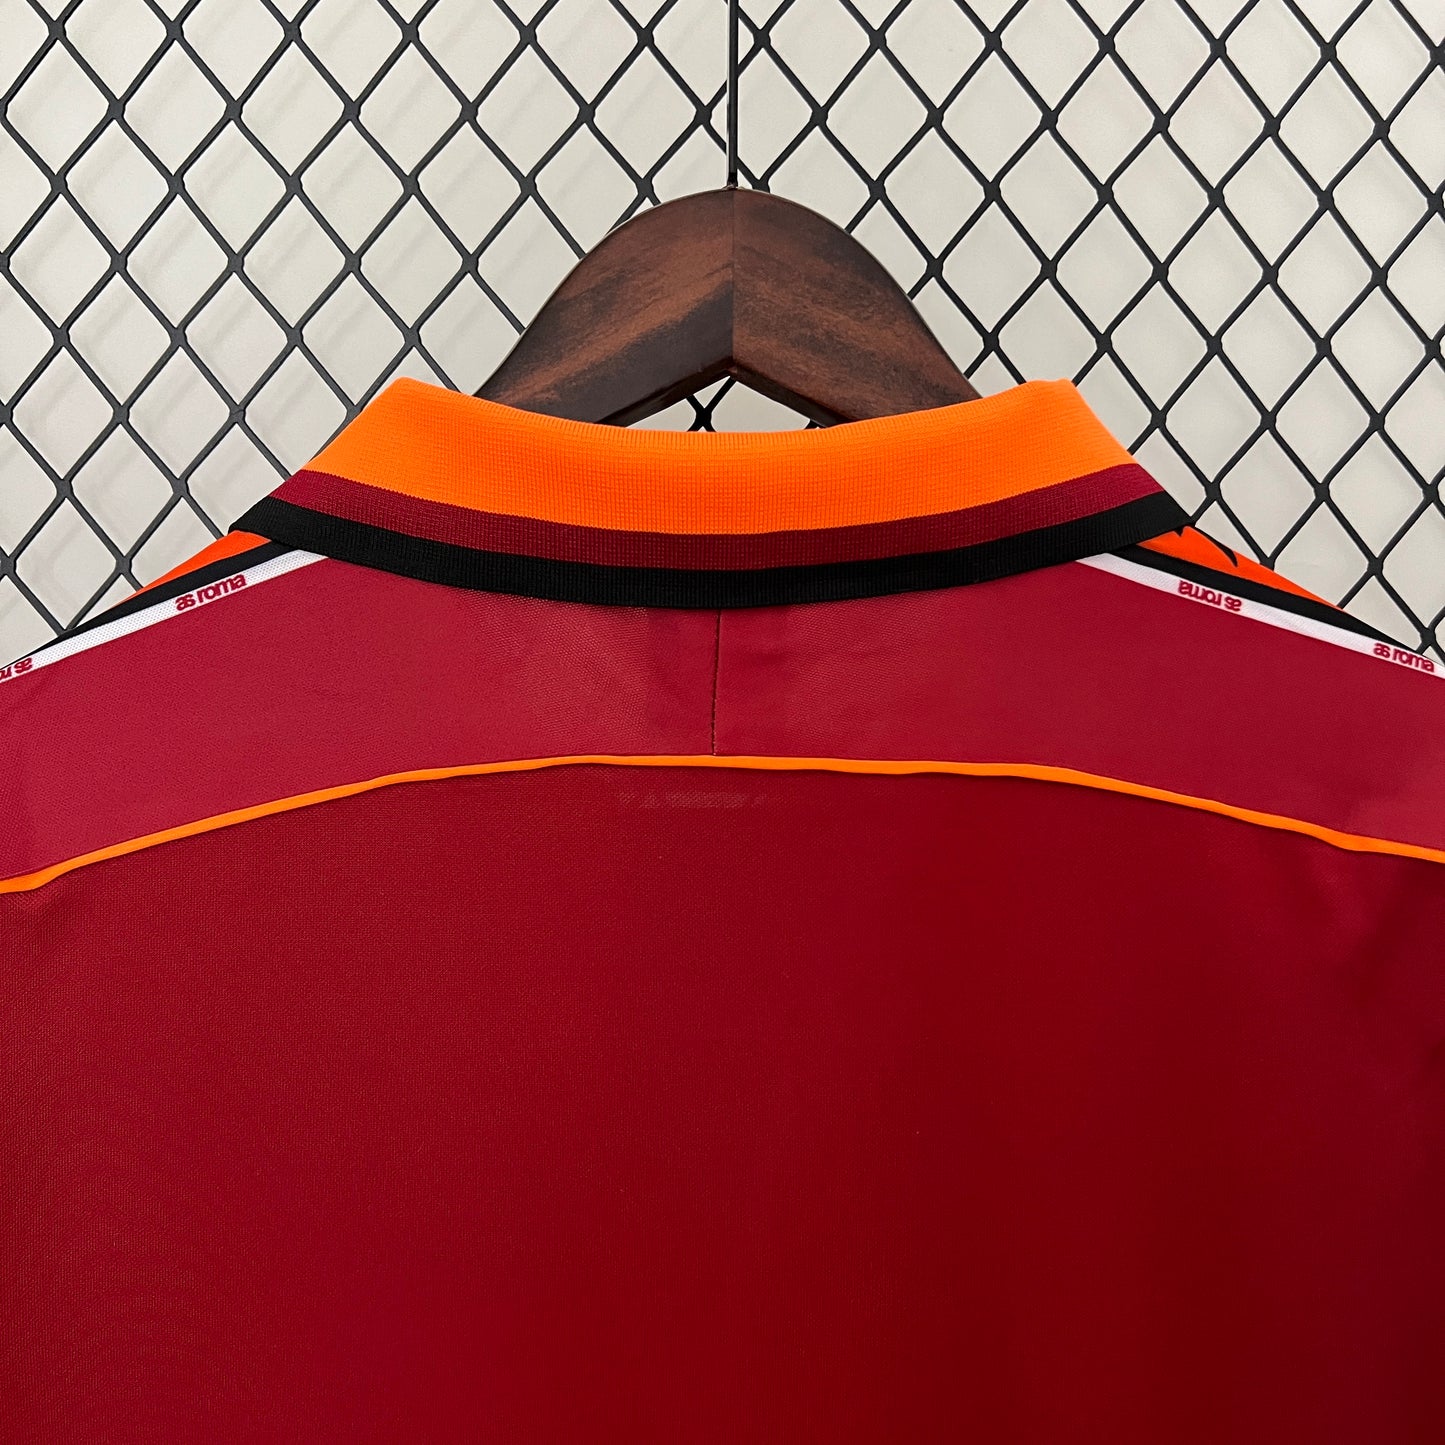 AS ROMA 1998 - 1999 HOME JERSEY